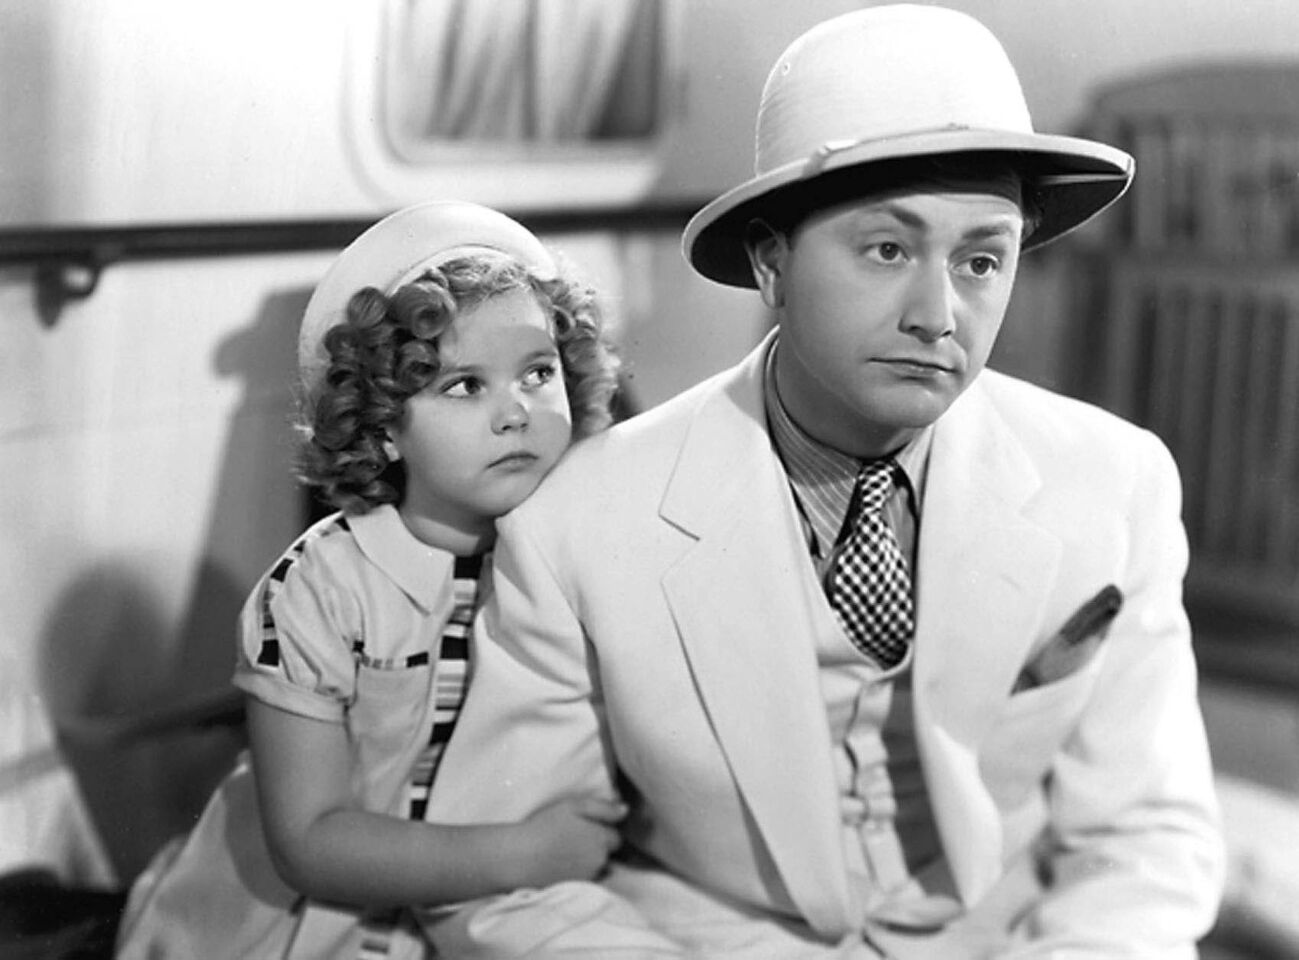 Shirley Temple in "Stowaway" with Robert Young.